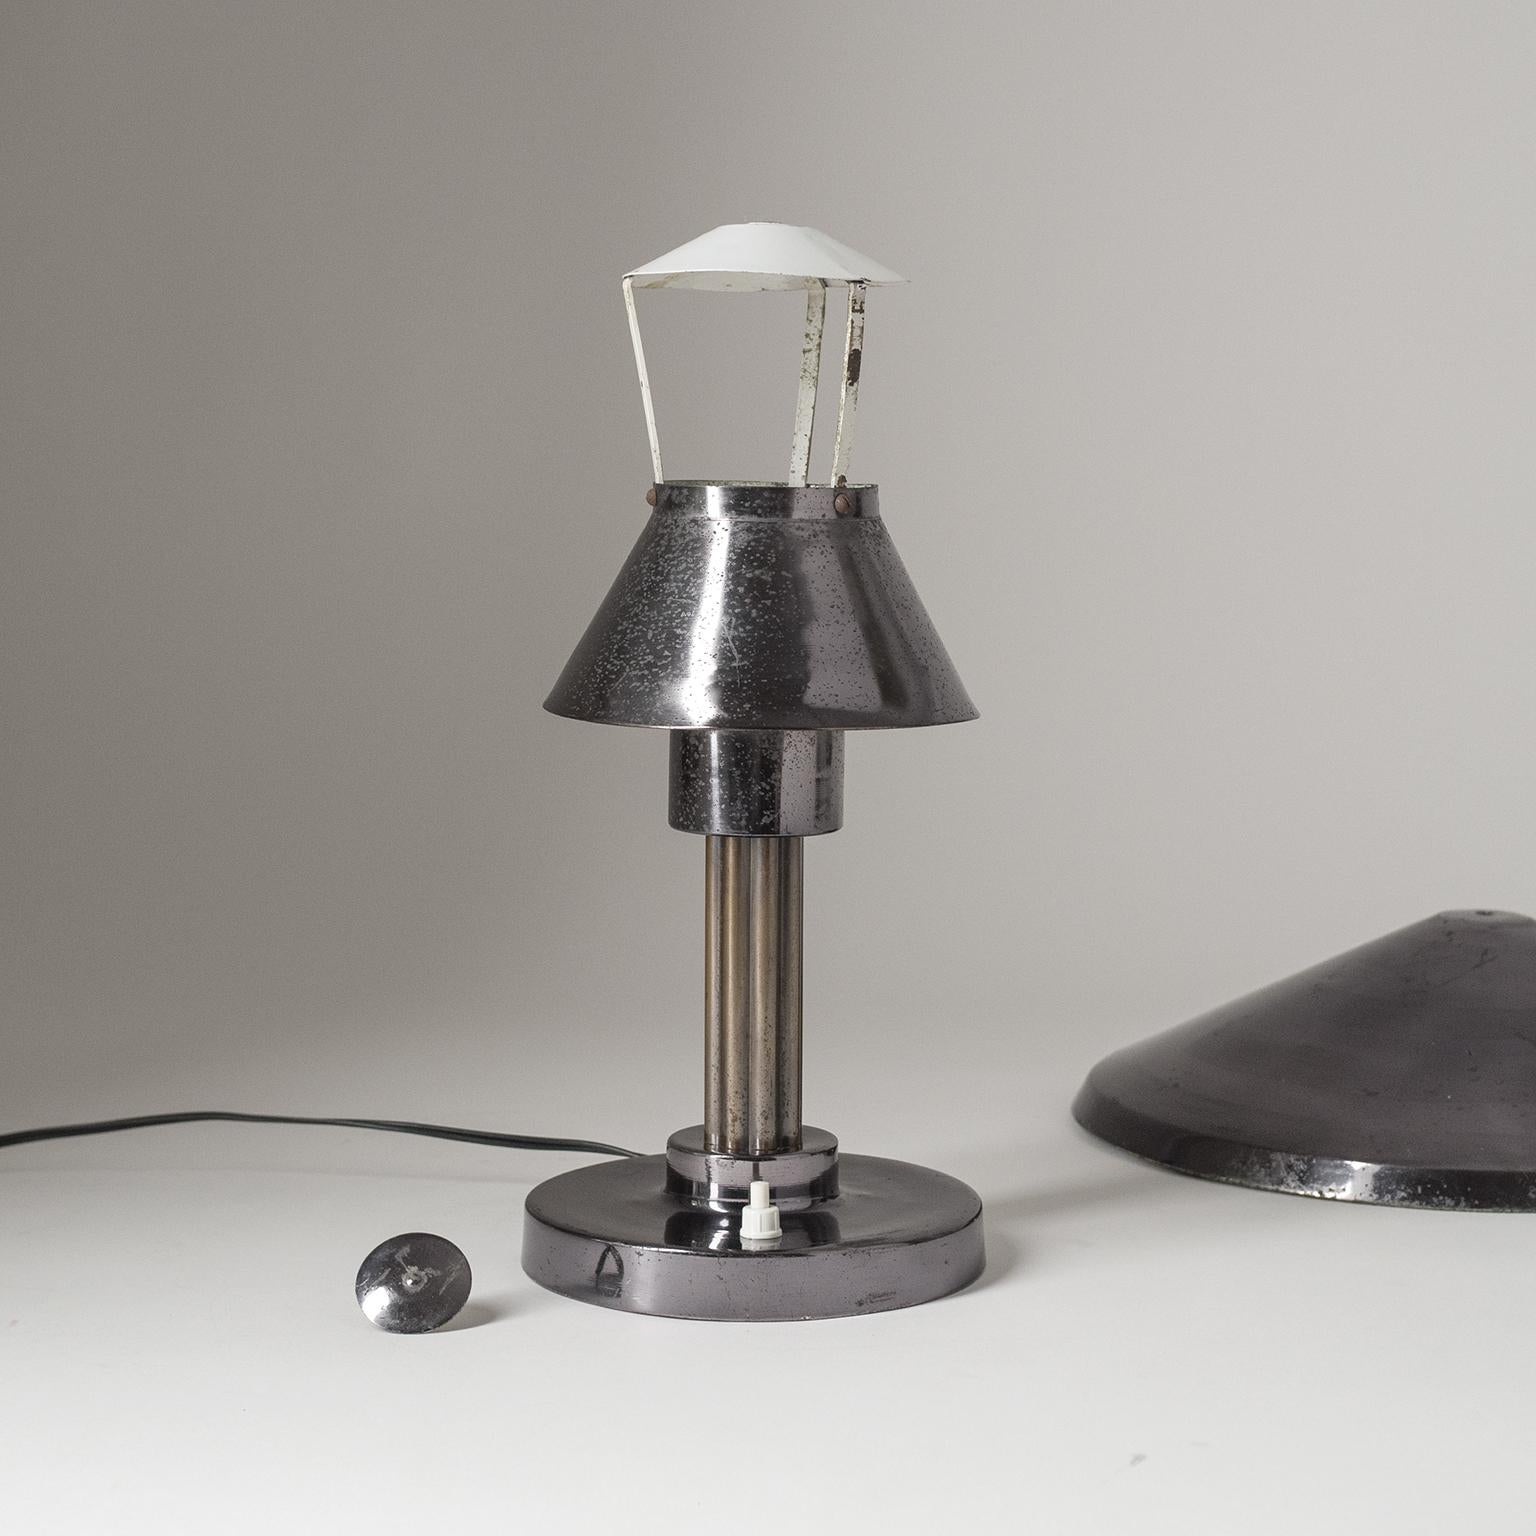 Italian Desk Lamp, 1950s, Patinated Nickel For Sale 4